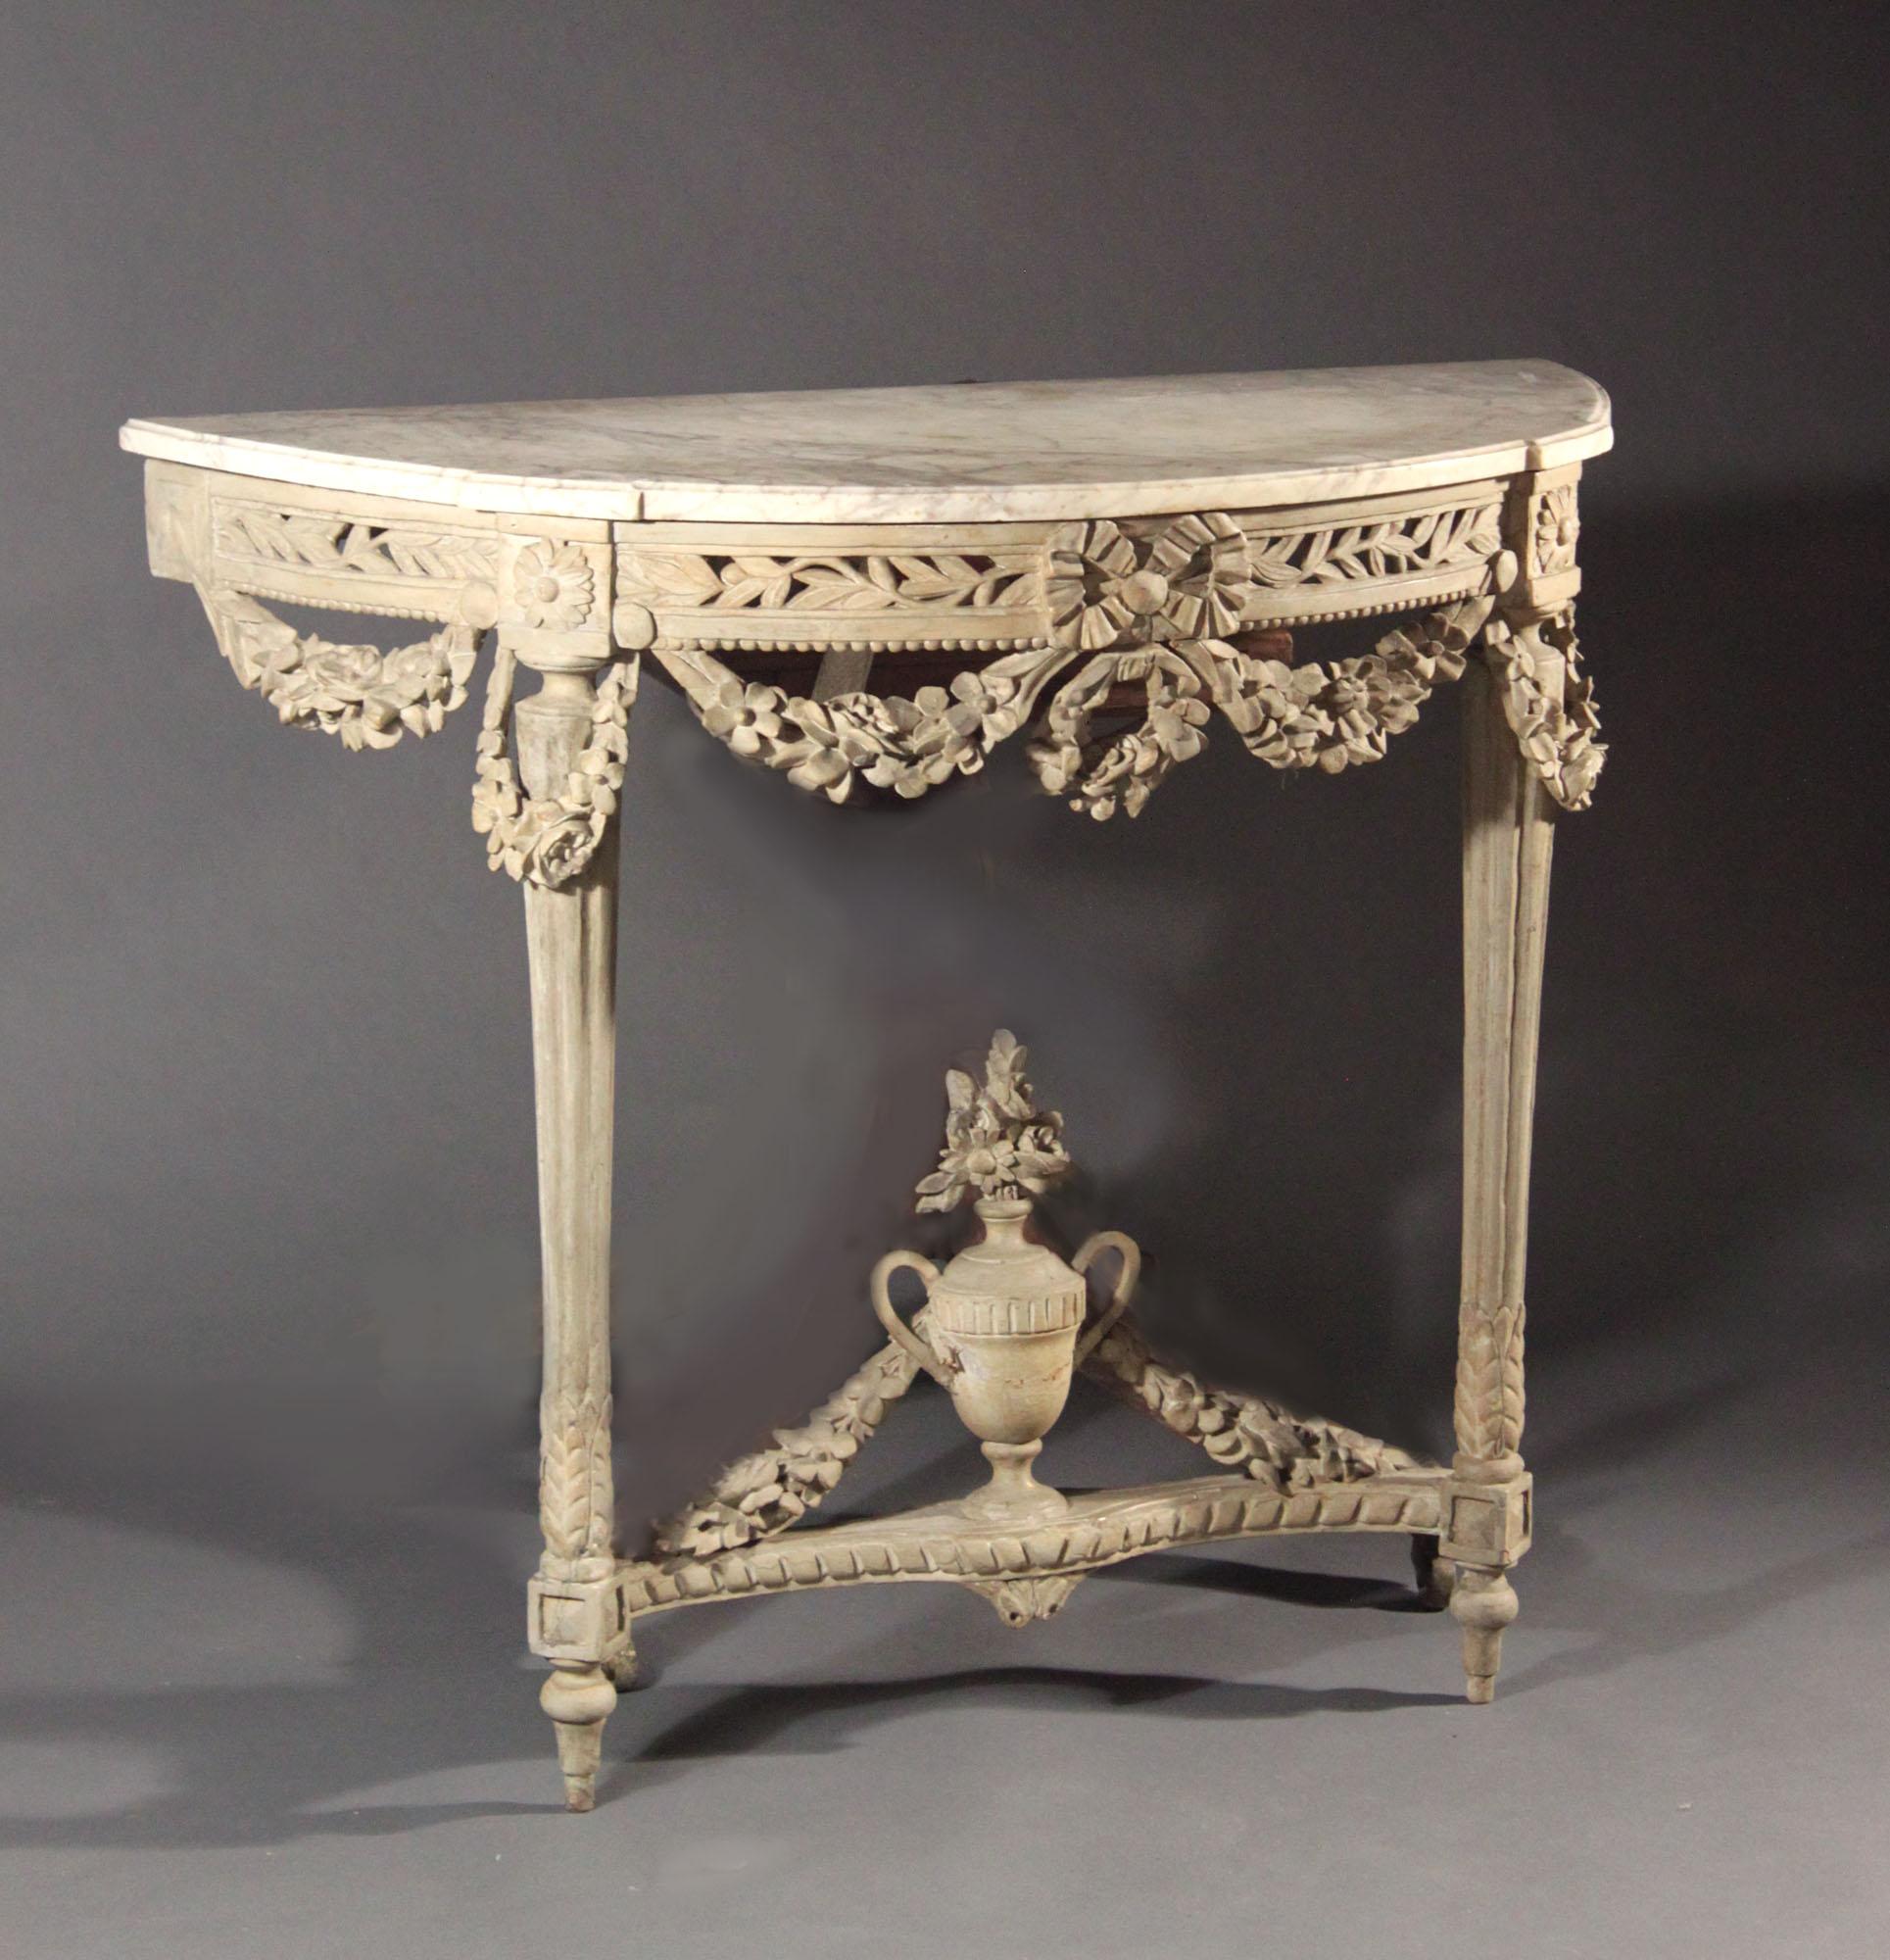 A Louis XVI period console table with its original Carrara marble-top; old grey paint with signs of the original gilding underneath. Superb carving: the pierced frieze with leaves and garlands of flowers, turned and fluted legs, twin handled vase